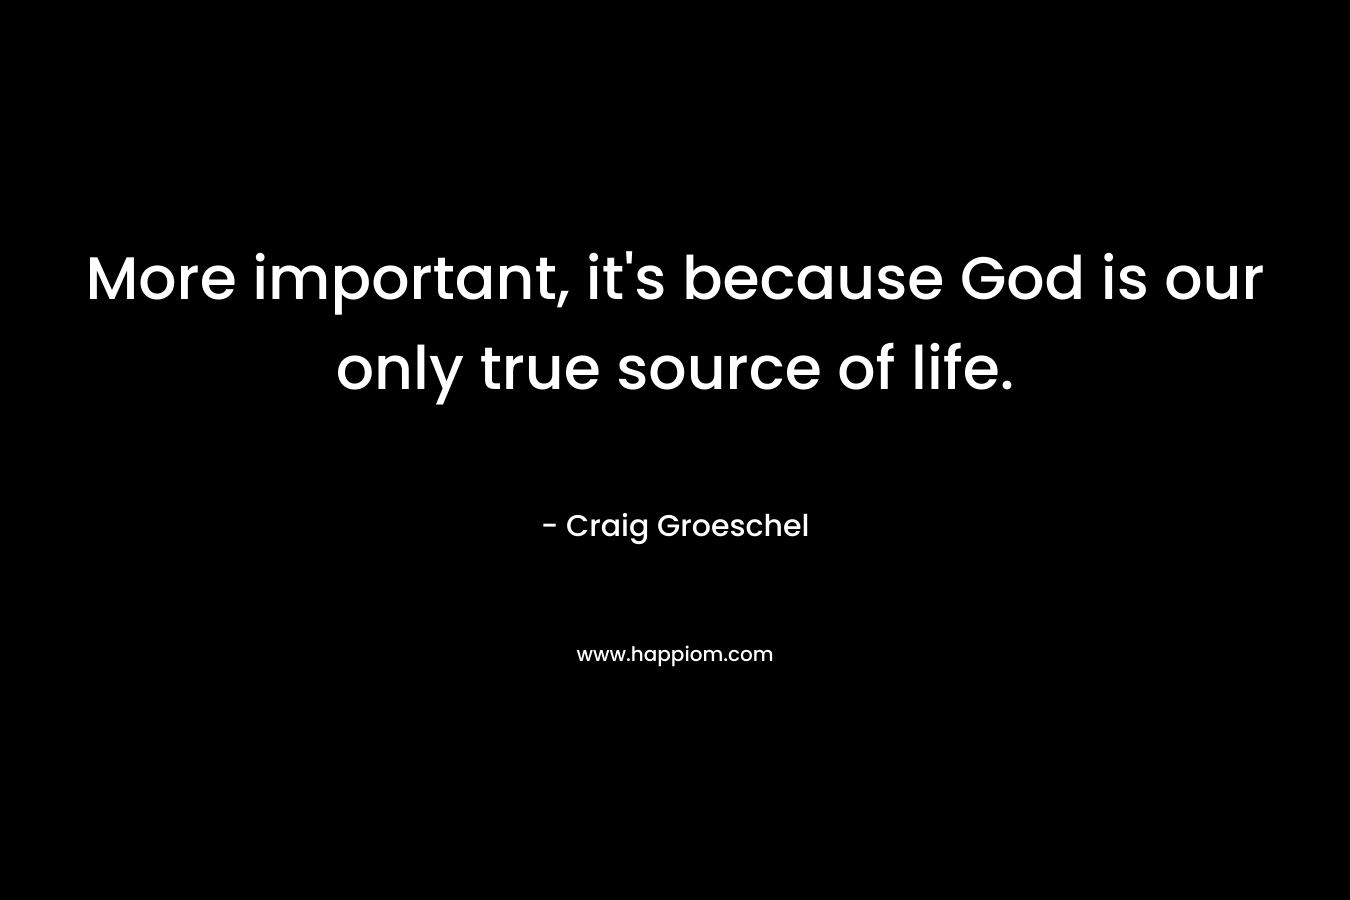 More important, it’s because God is our only true source of life. – Craig Groeschel